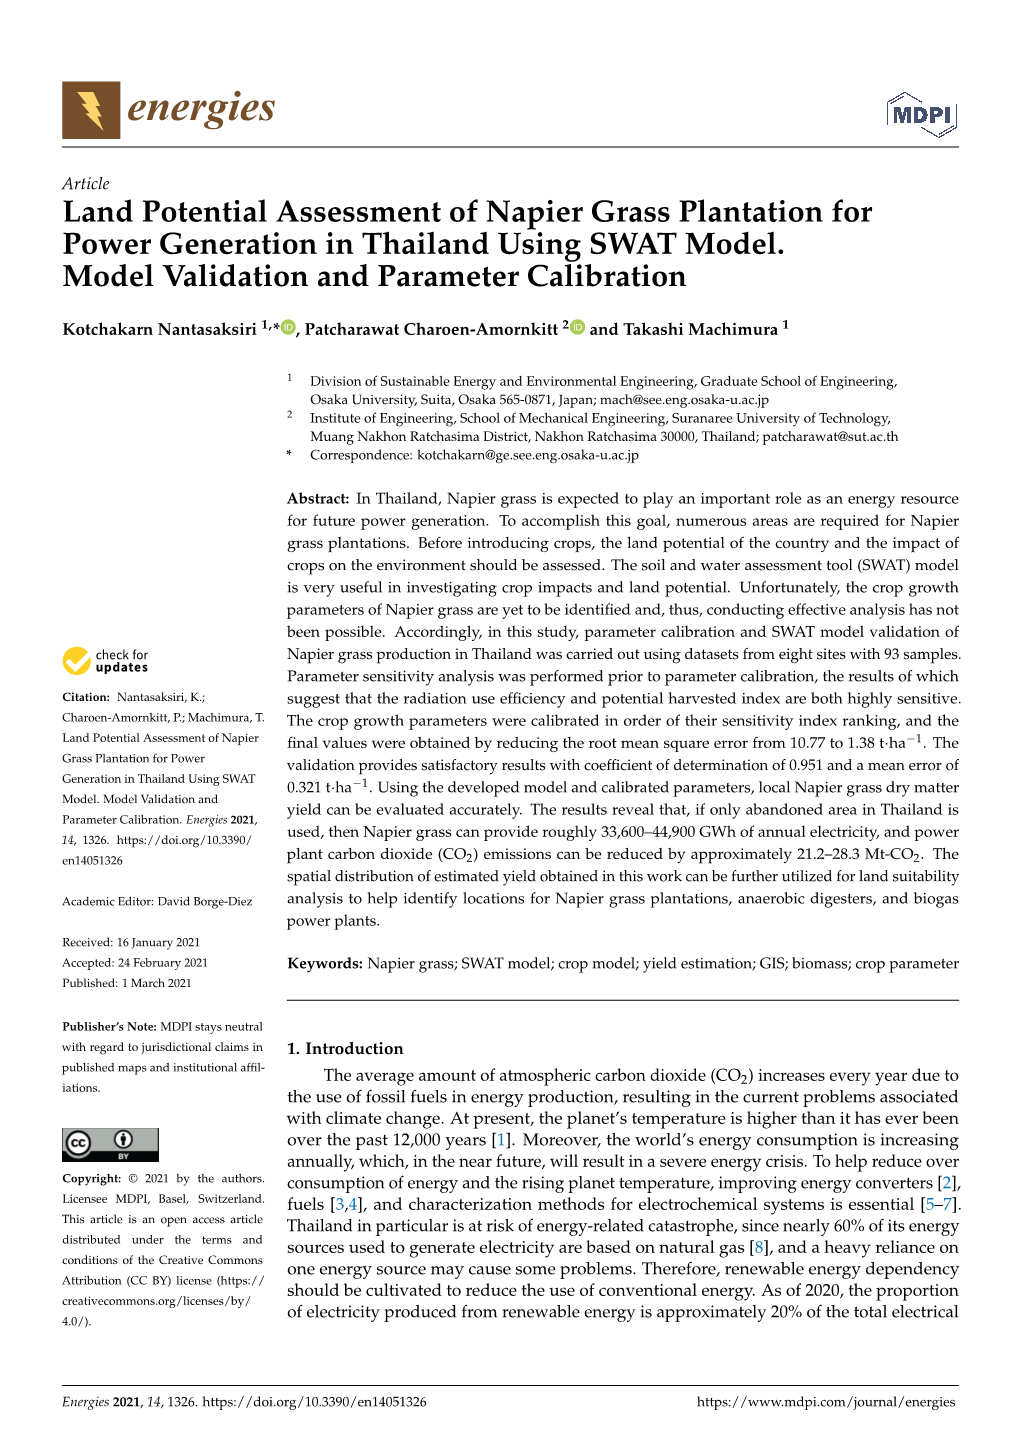 Land Potential Assessment of Napier Grass Plantation for Power Generation in Thailand Using SWAT Model